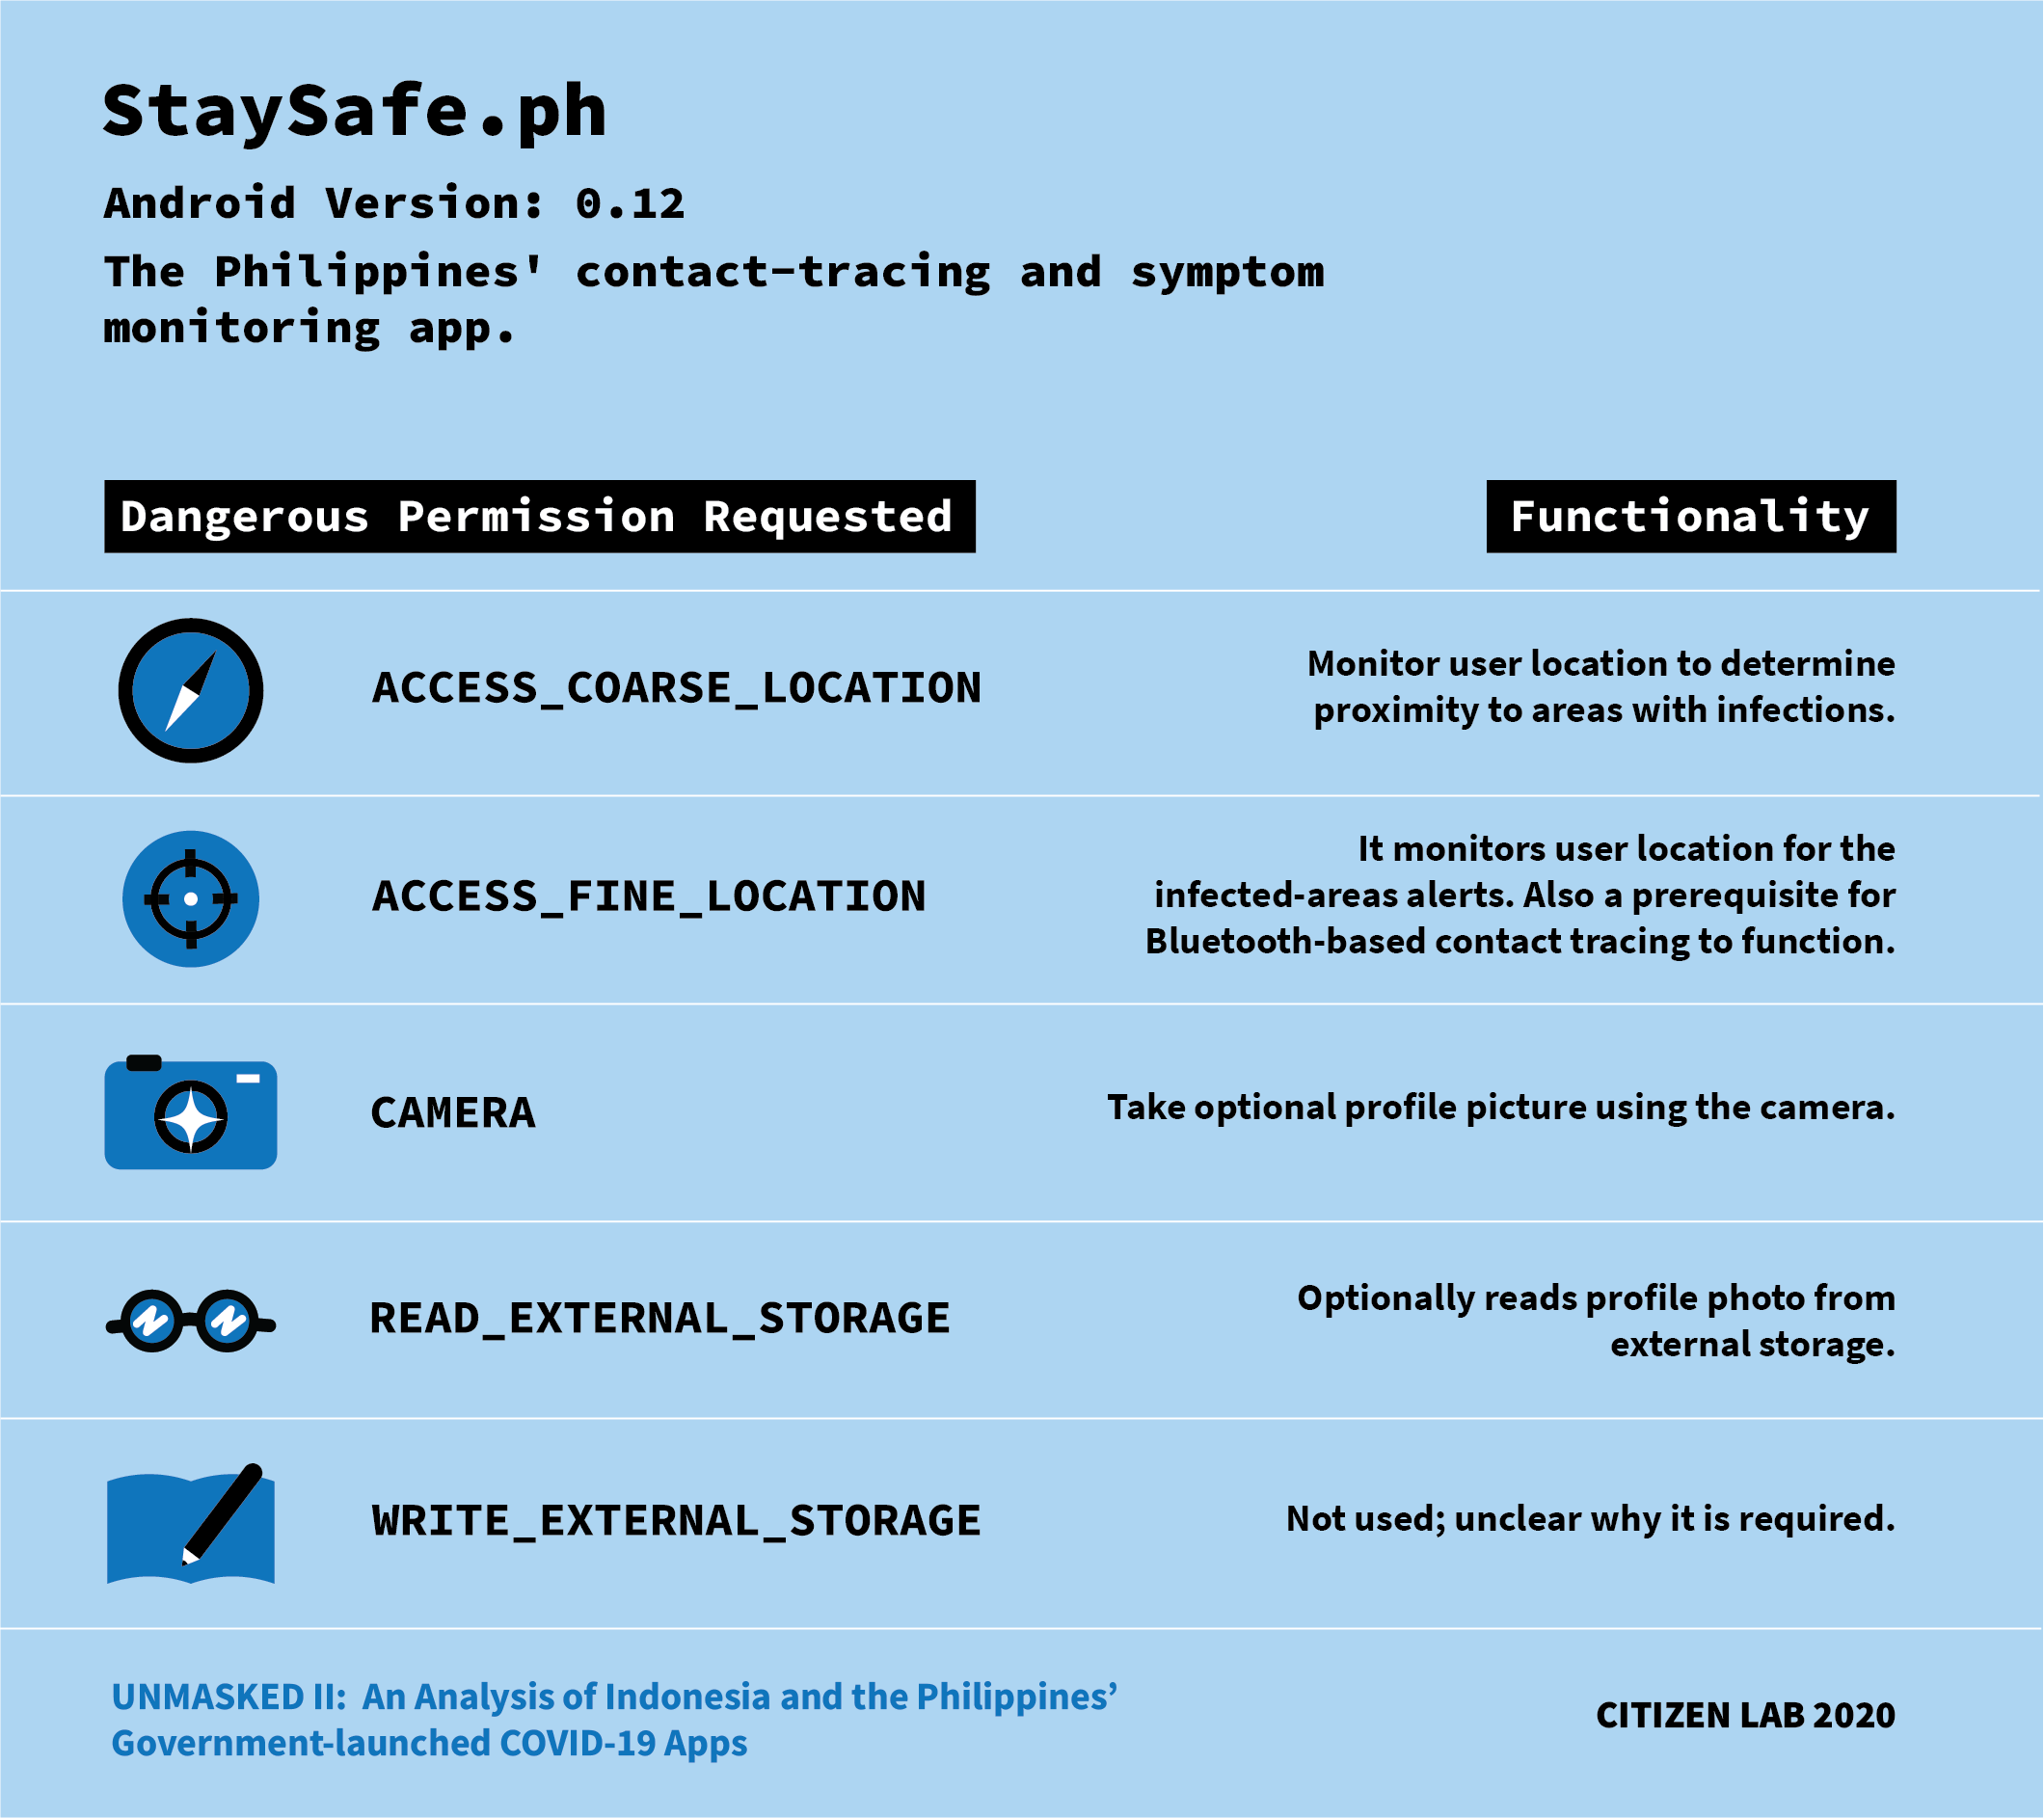 Figure 2: Dangerous permissions requested by StaySafe PH and their functionality.